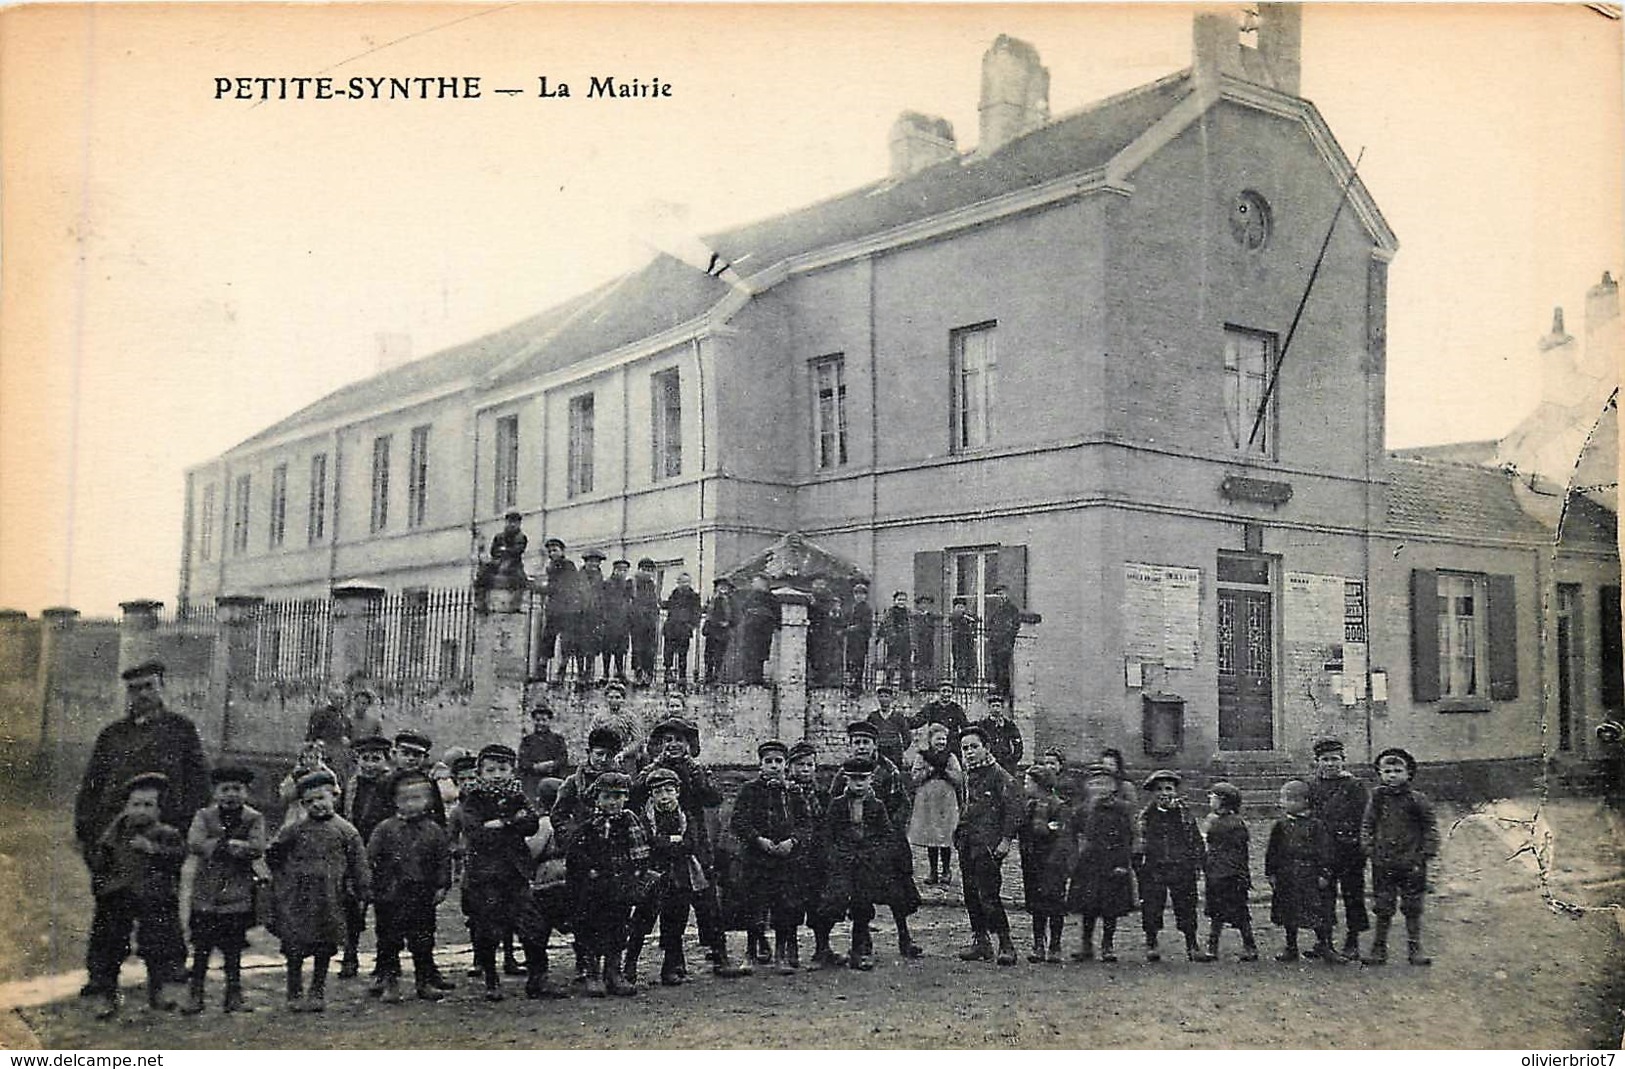 France - 59 - Petite-Synthe - La Mairie - Grande Synthe